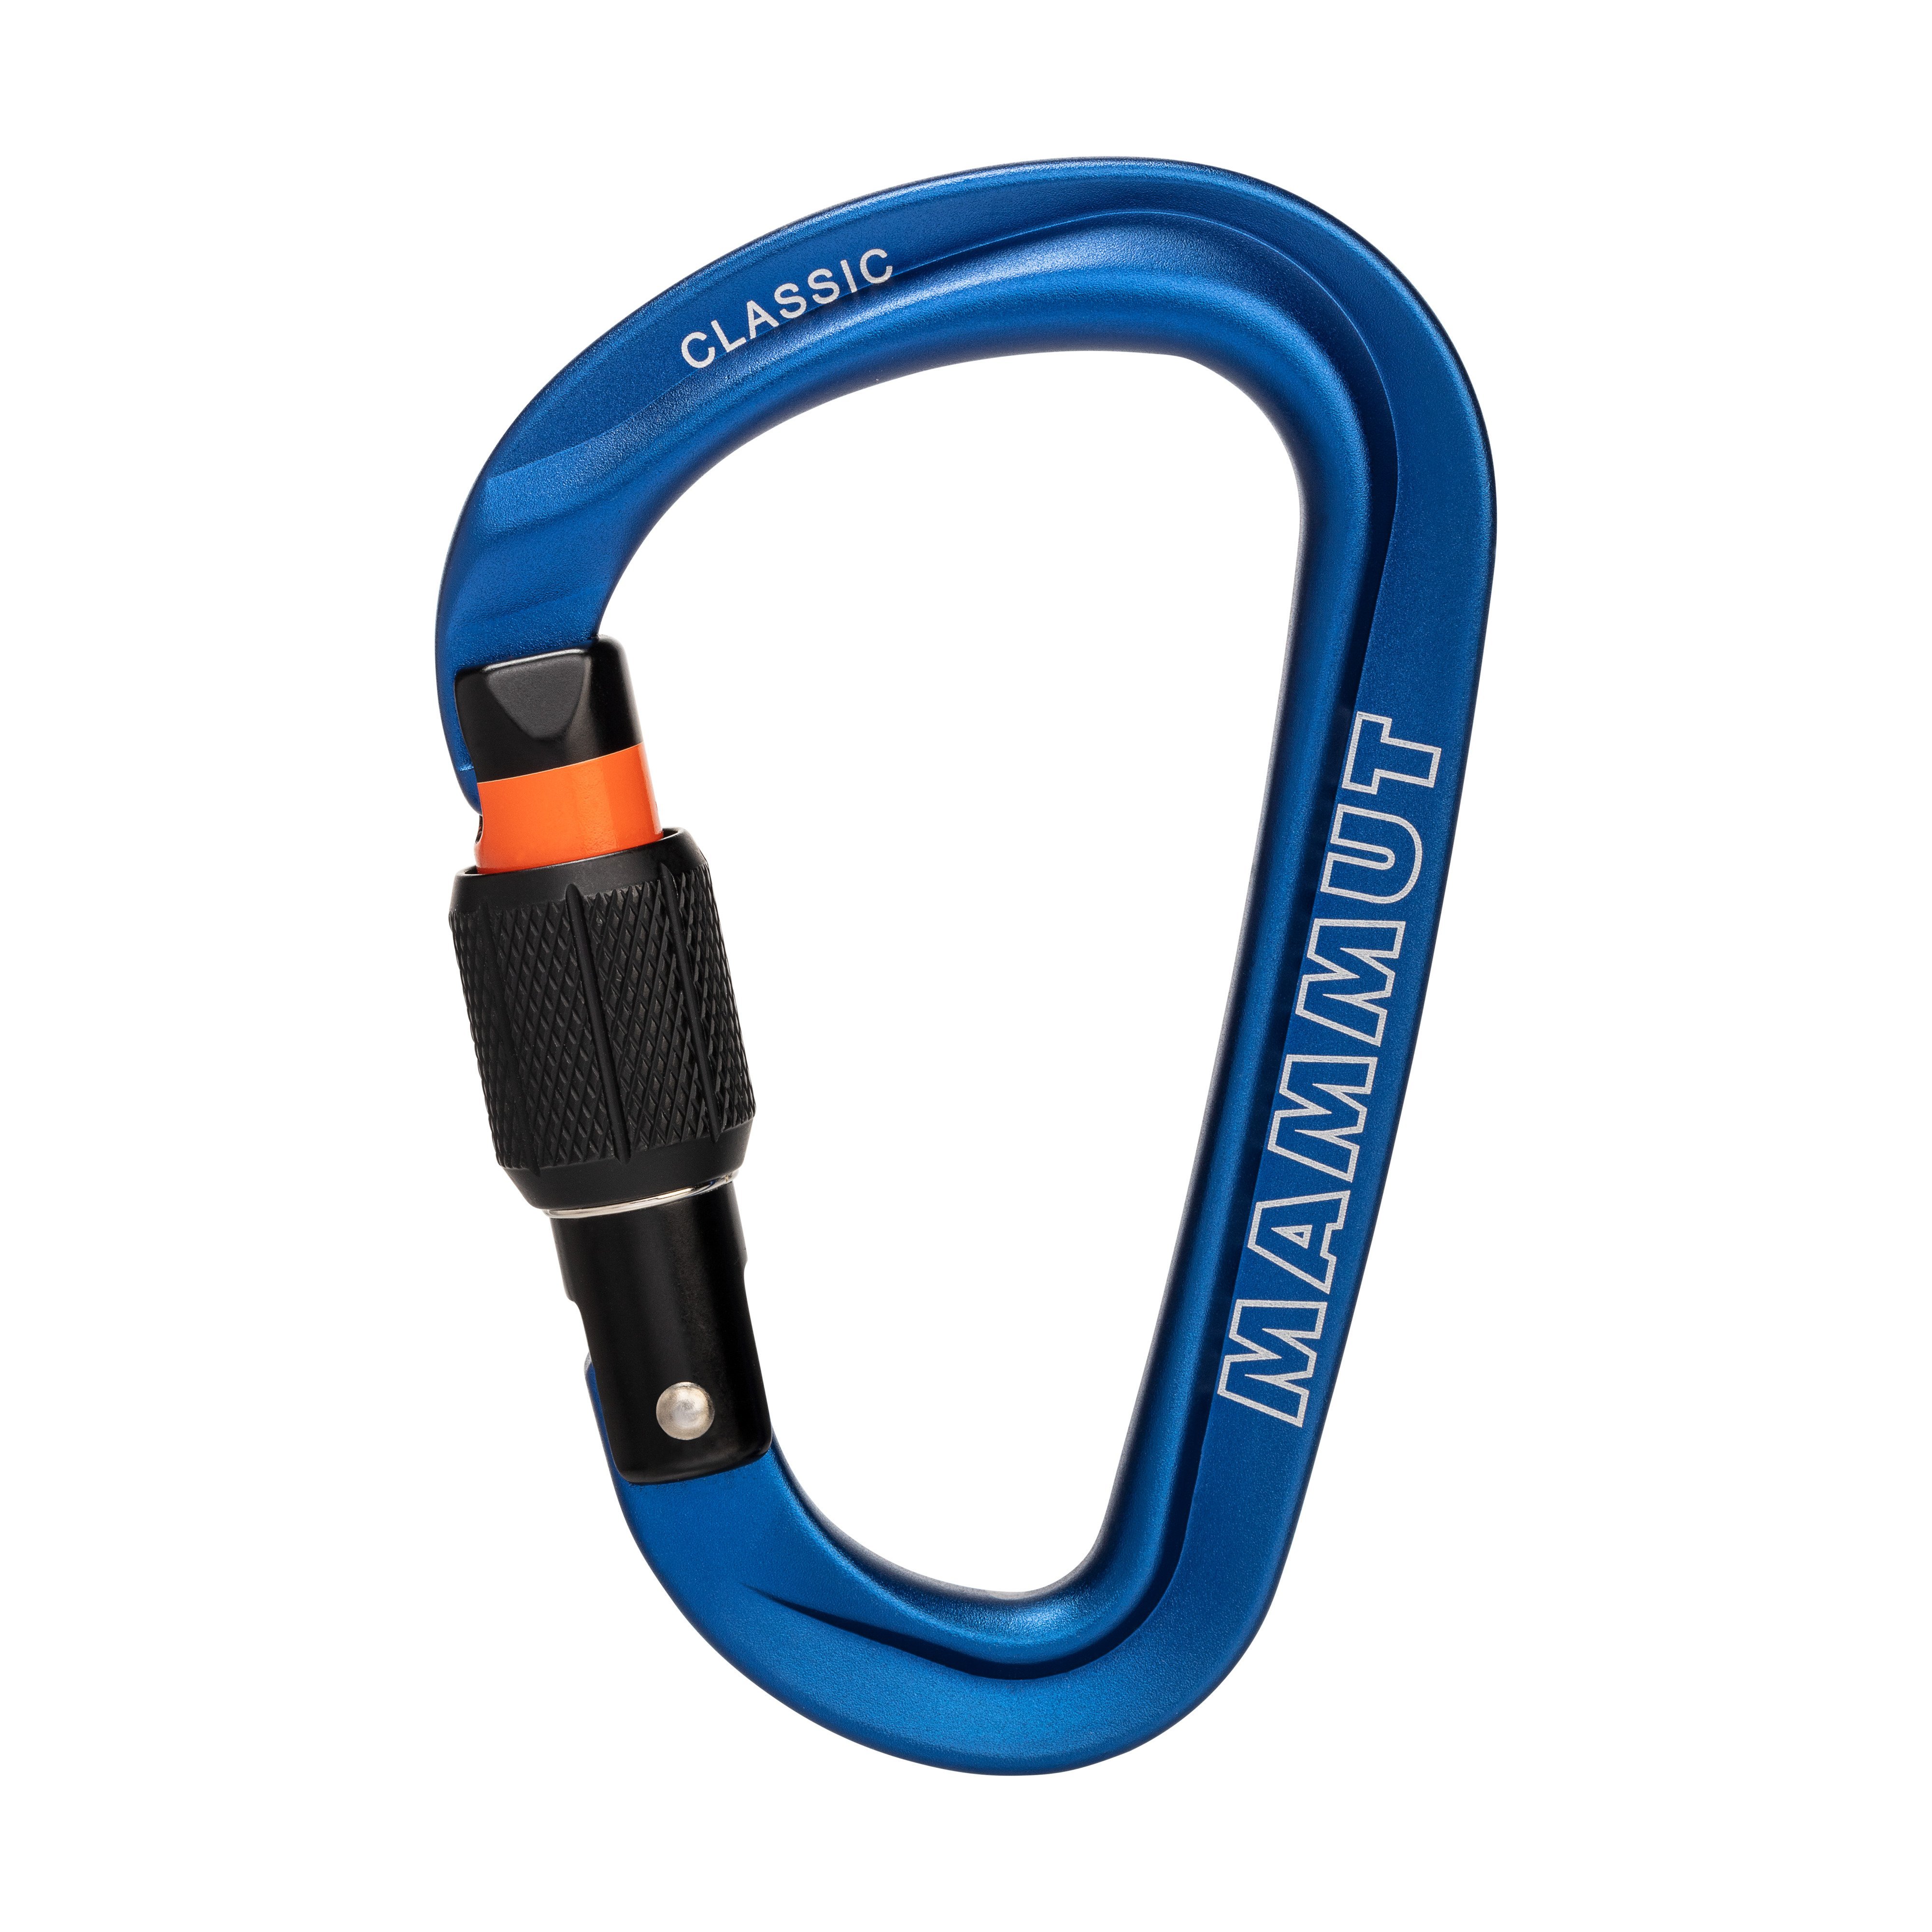 Classic HMS Screwgate Carabiner - blue, one size product image